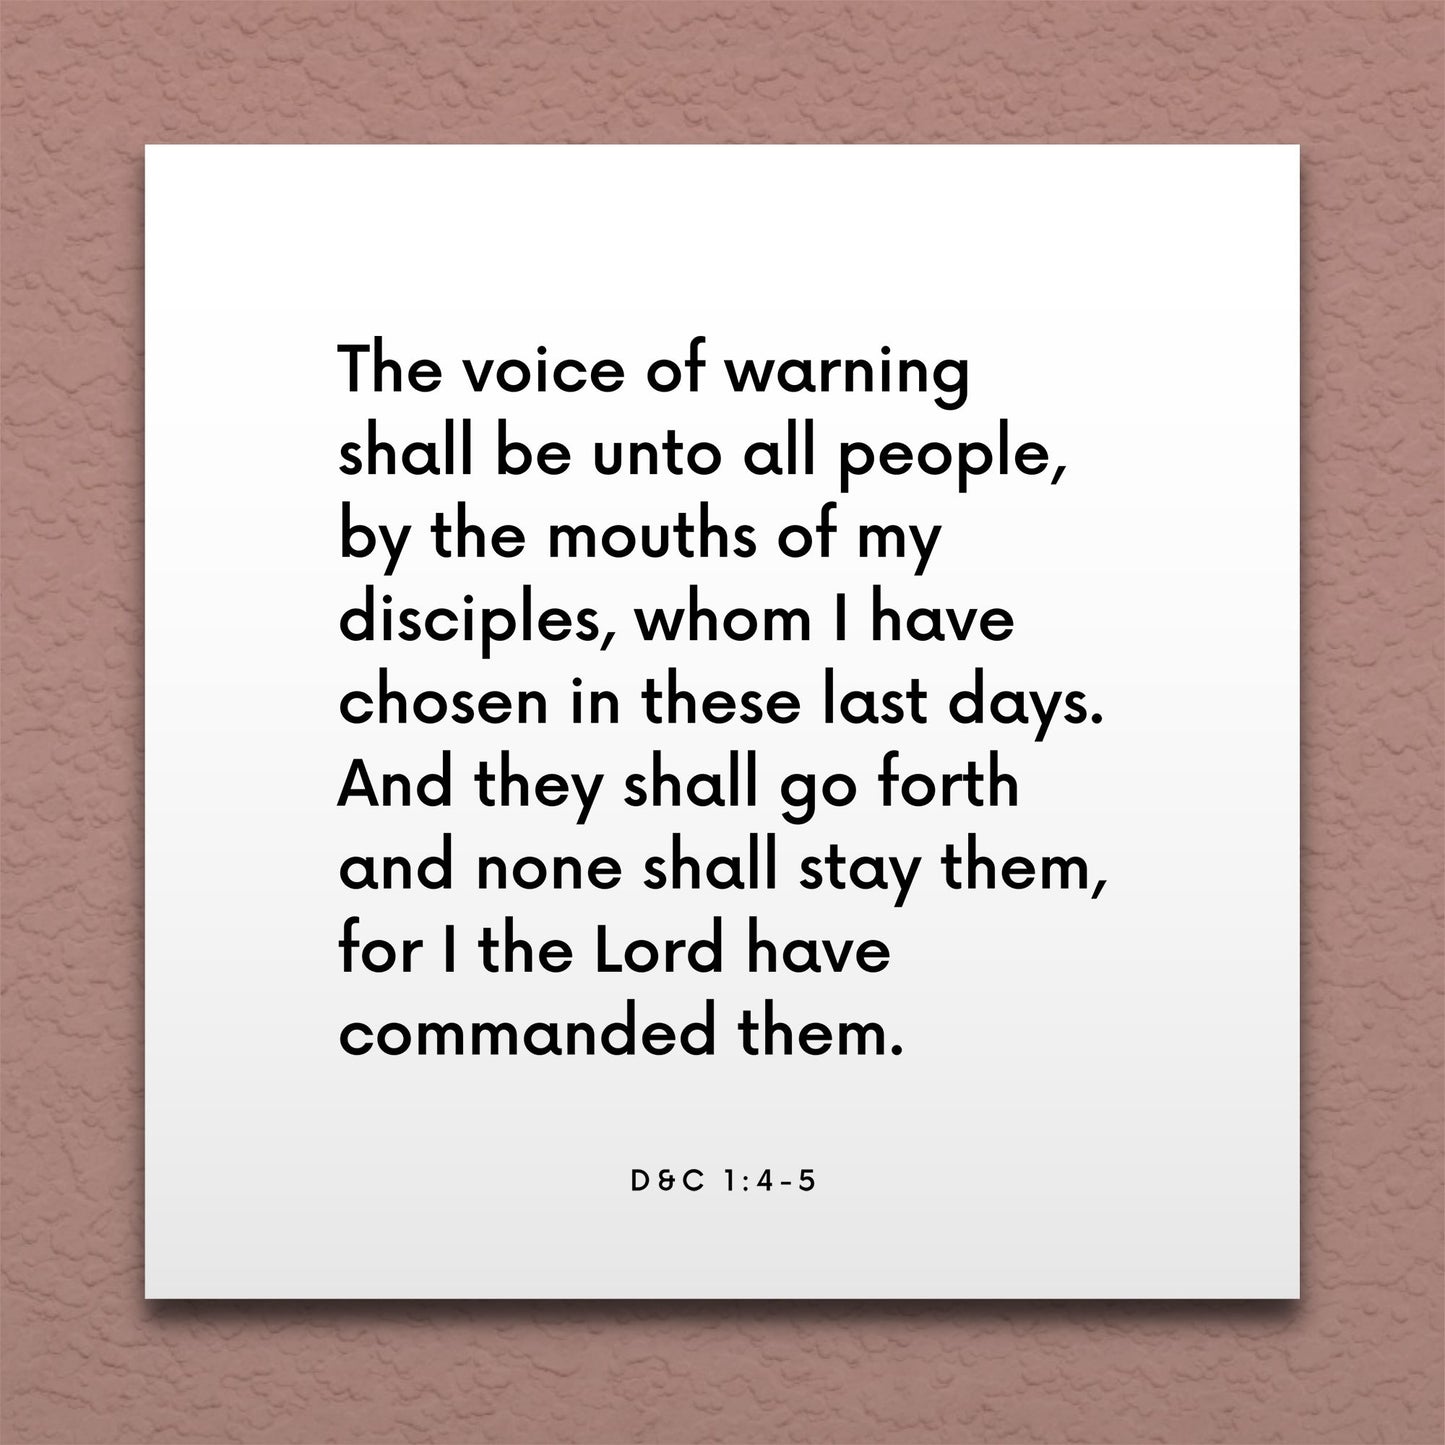 Wall-mounted scripture tile for D&C 1:4-5 - "The voice of warning shall be unto all people"